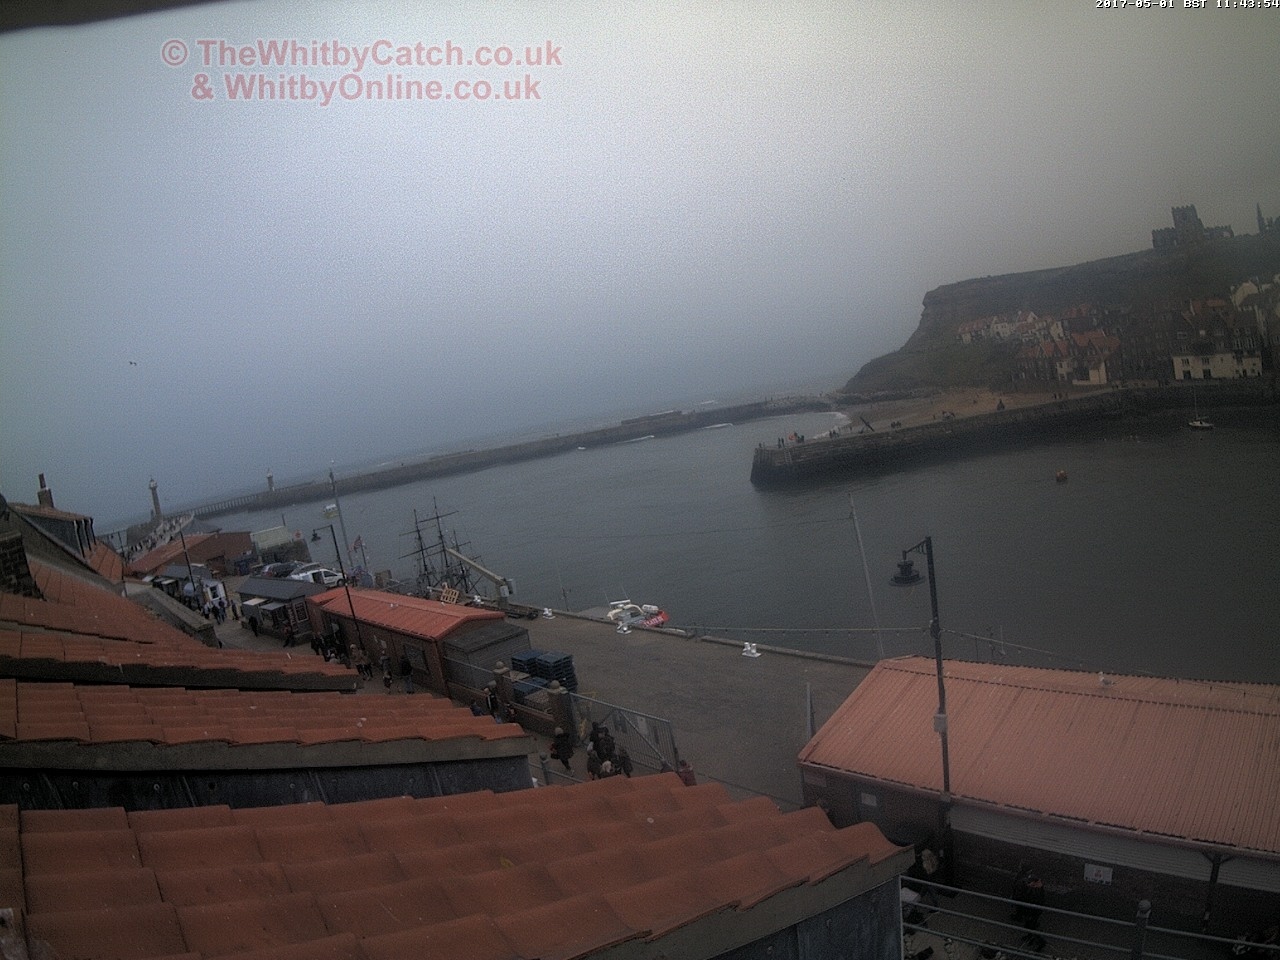 Whitby Mon 1st May 2017 11:44.